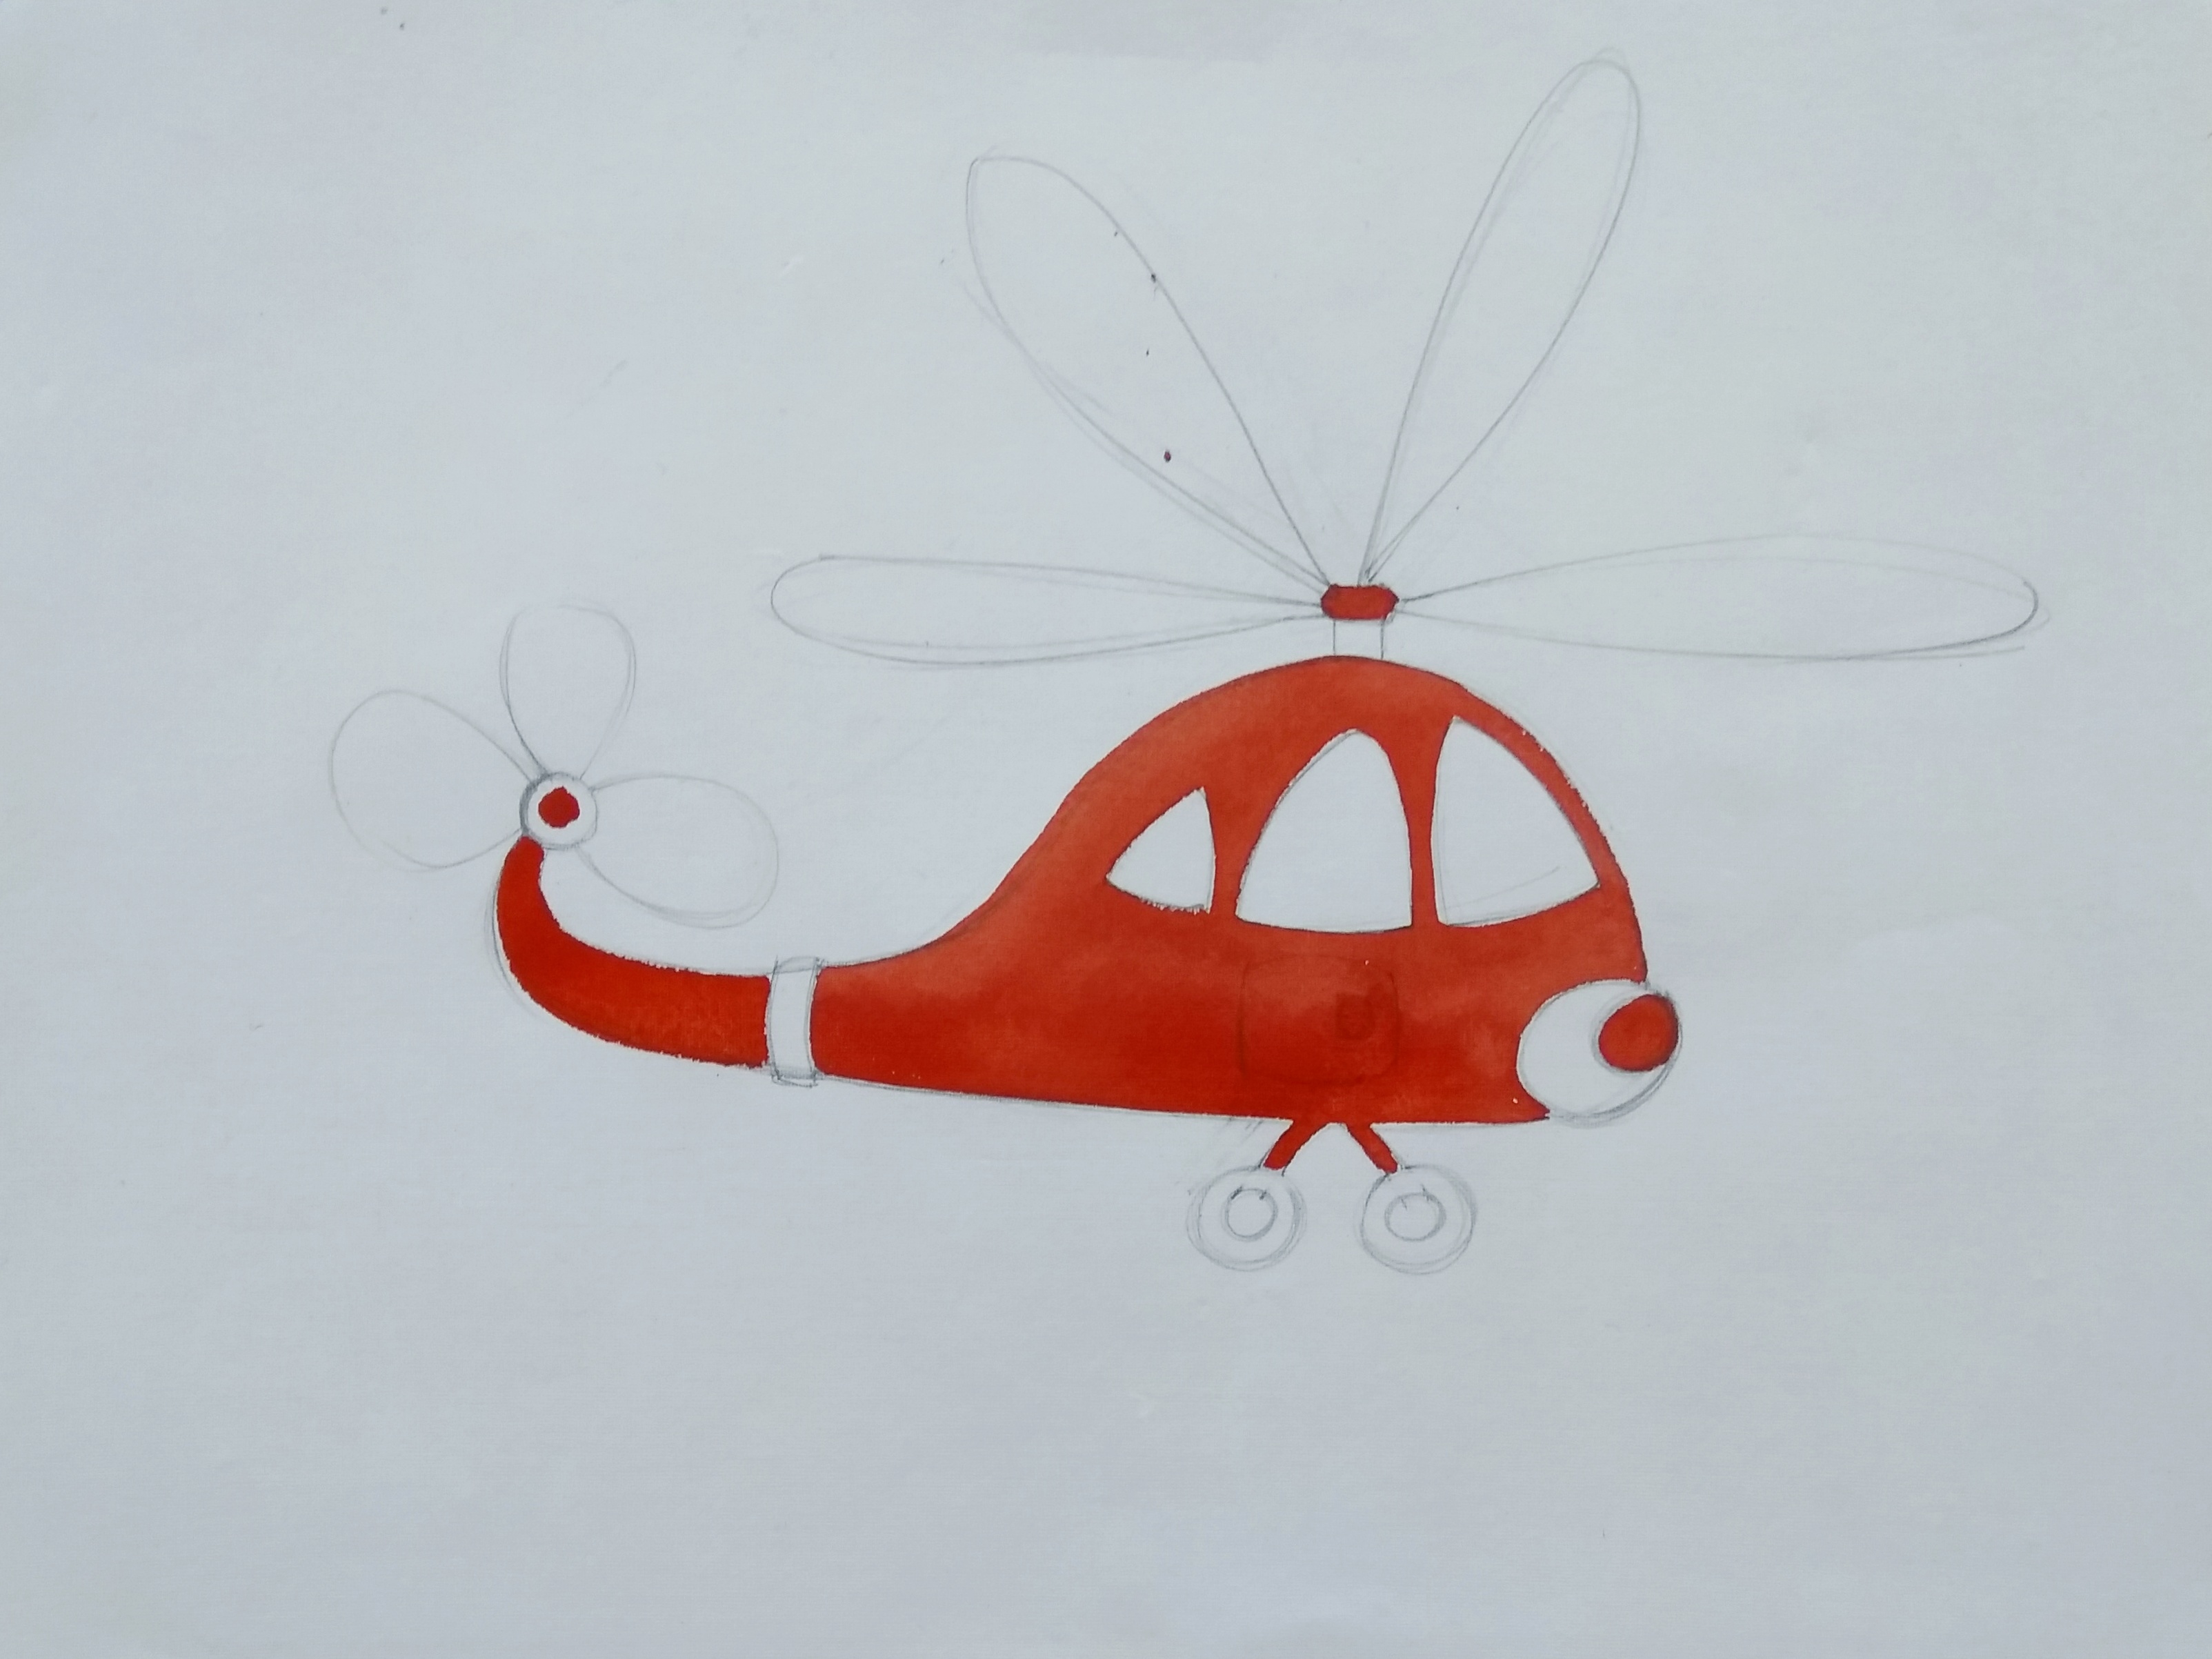 How to draw helicopter step by step | Drawing helicopter | Easy helicopter  drawing | Kidooz Drawing - YouTube